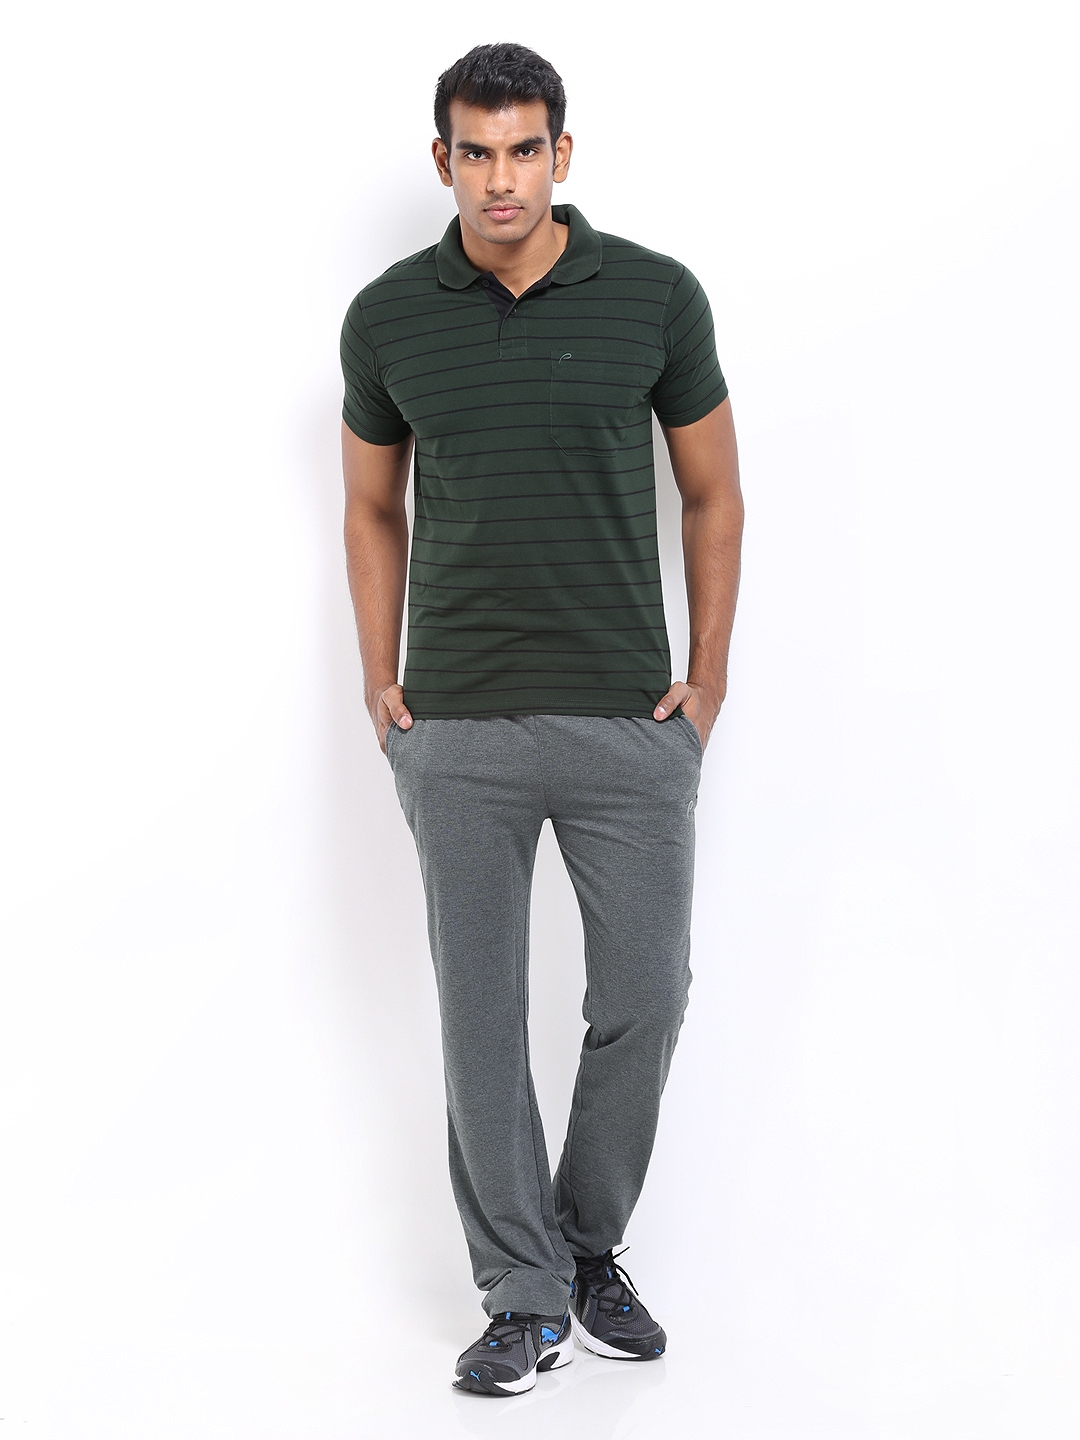 TROUSERs AND POLO shirt  Shopee Philippines